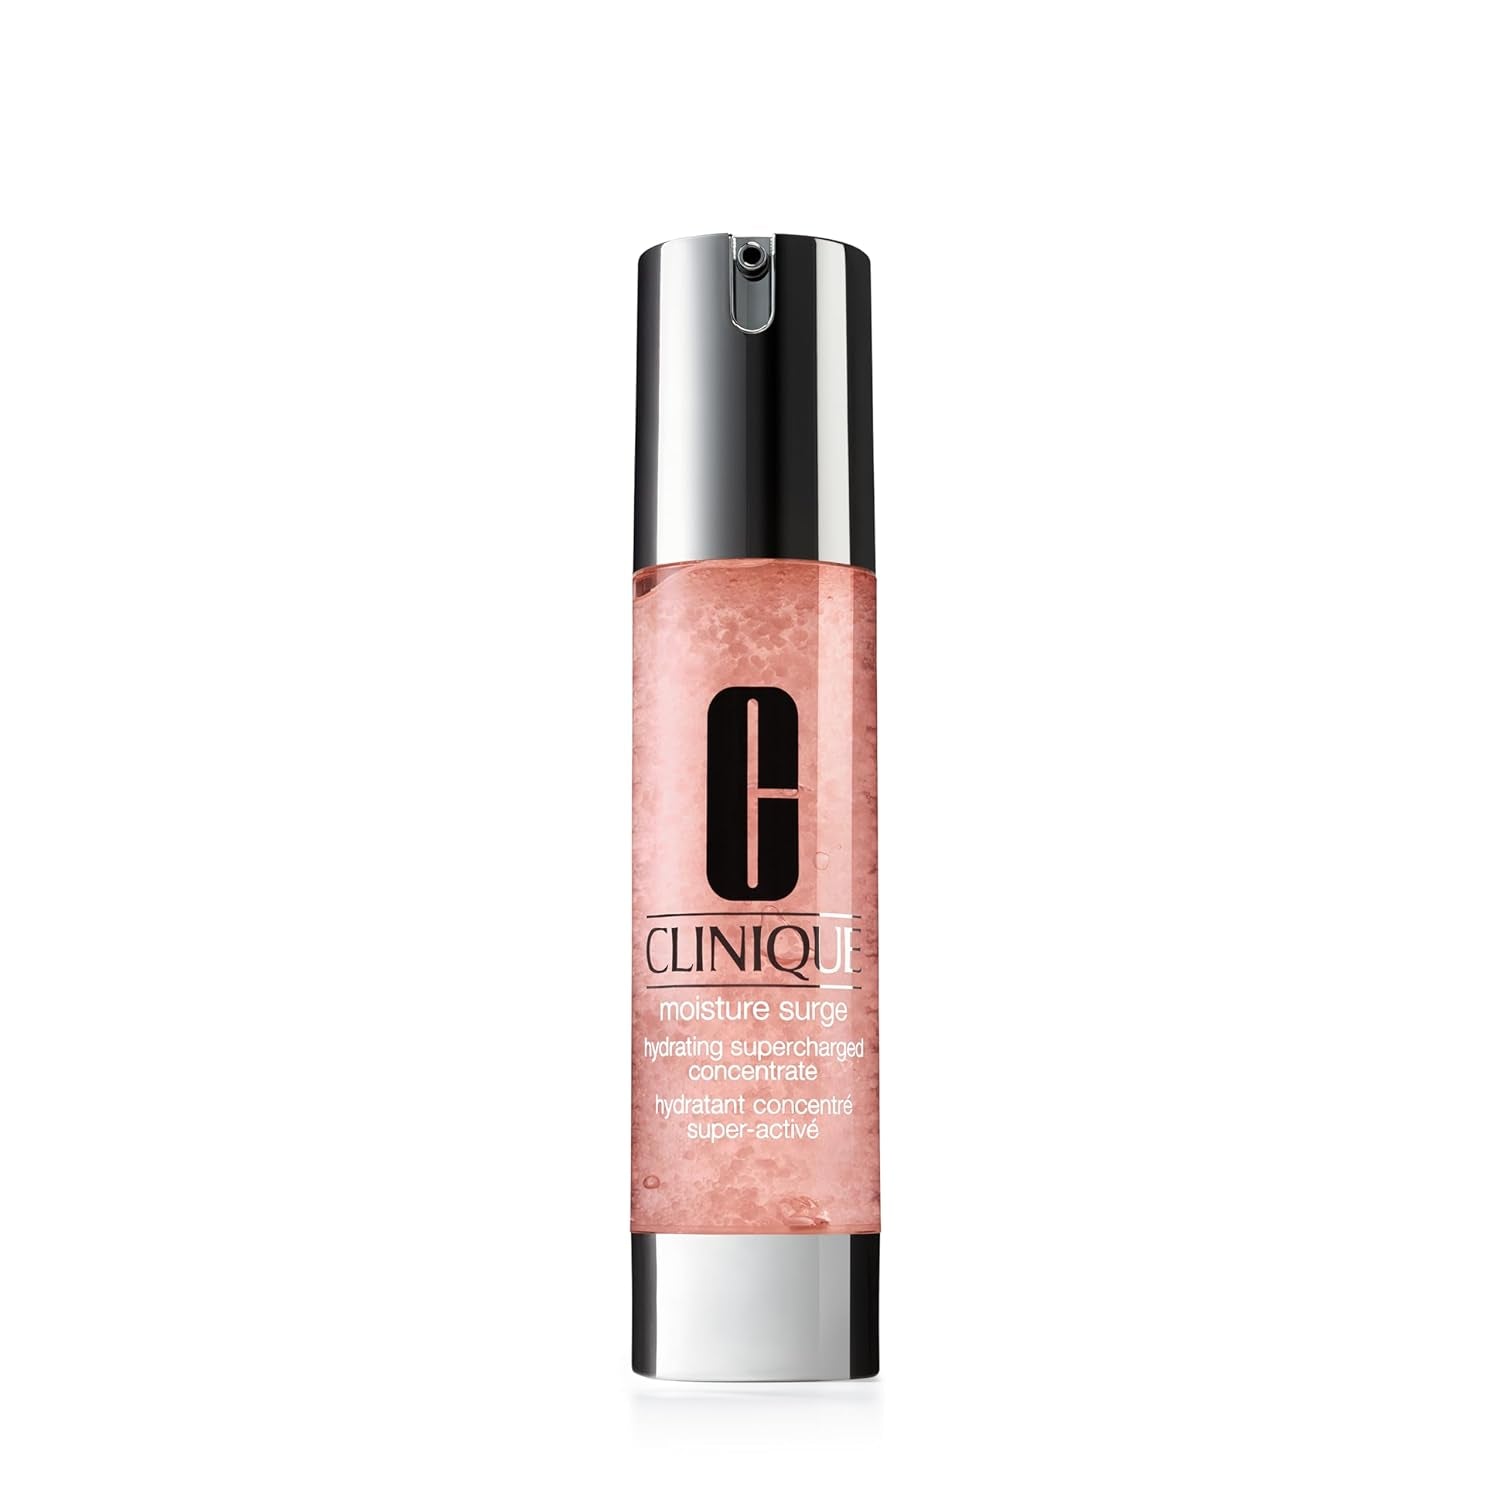 Clinique Moisture Surge Hydrating Supercharged Concentrate Face Serum